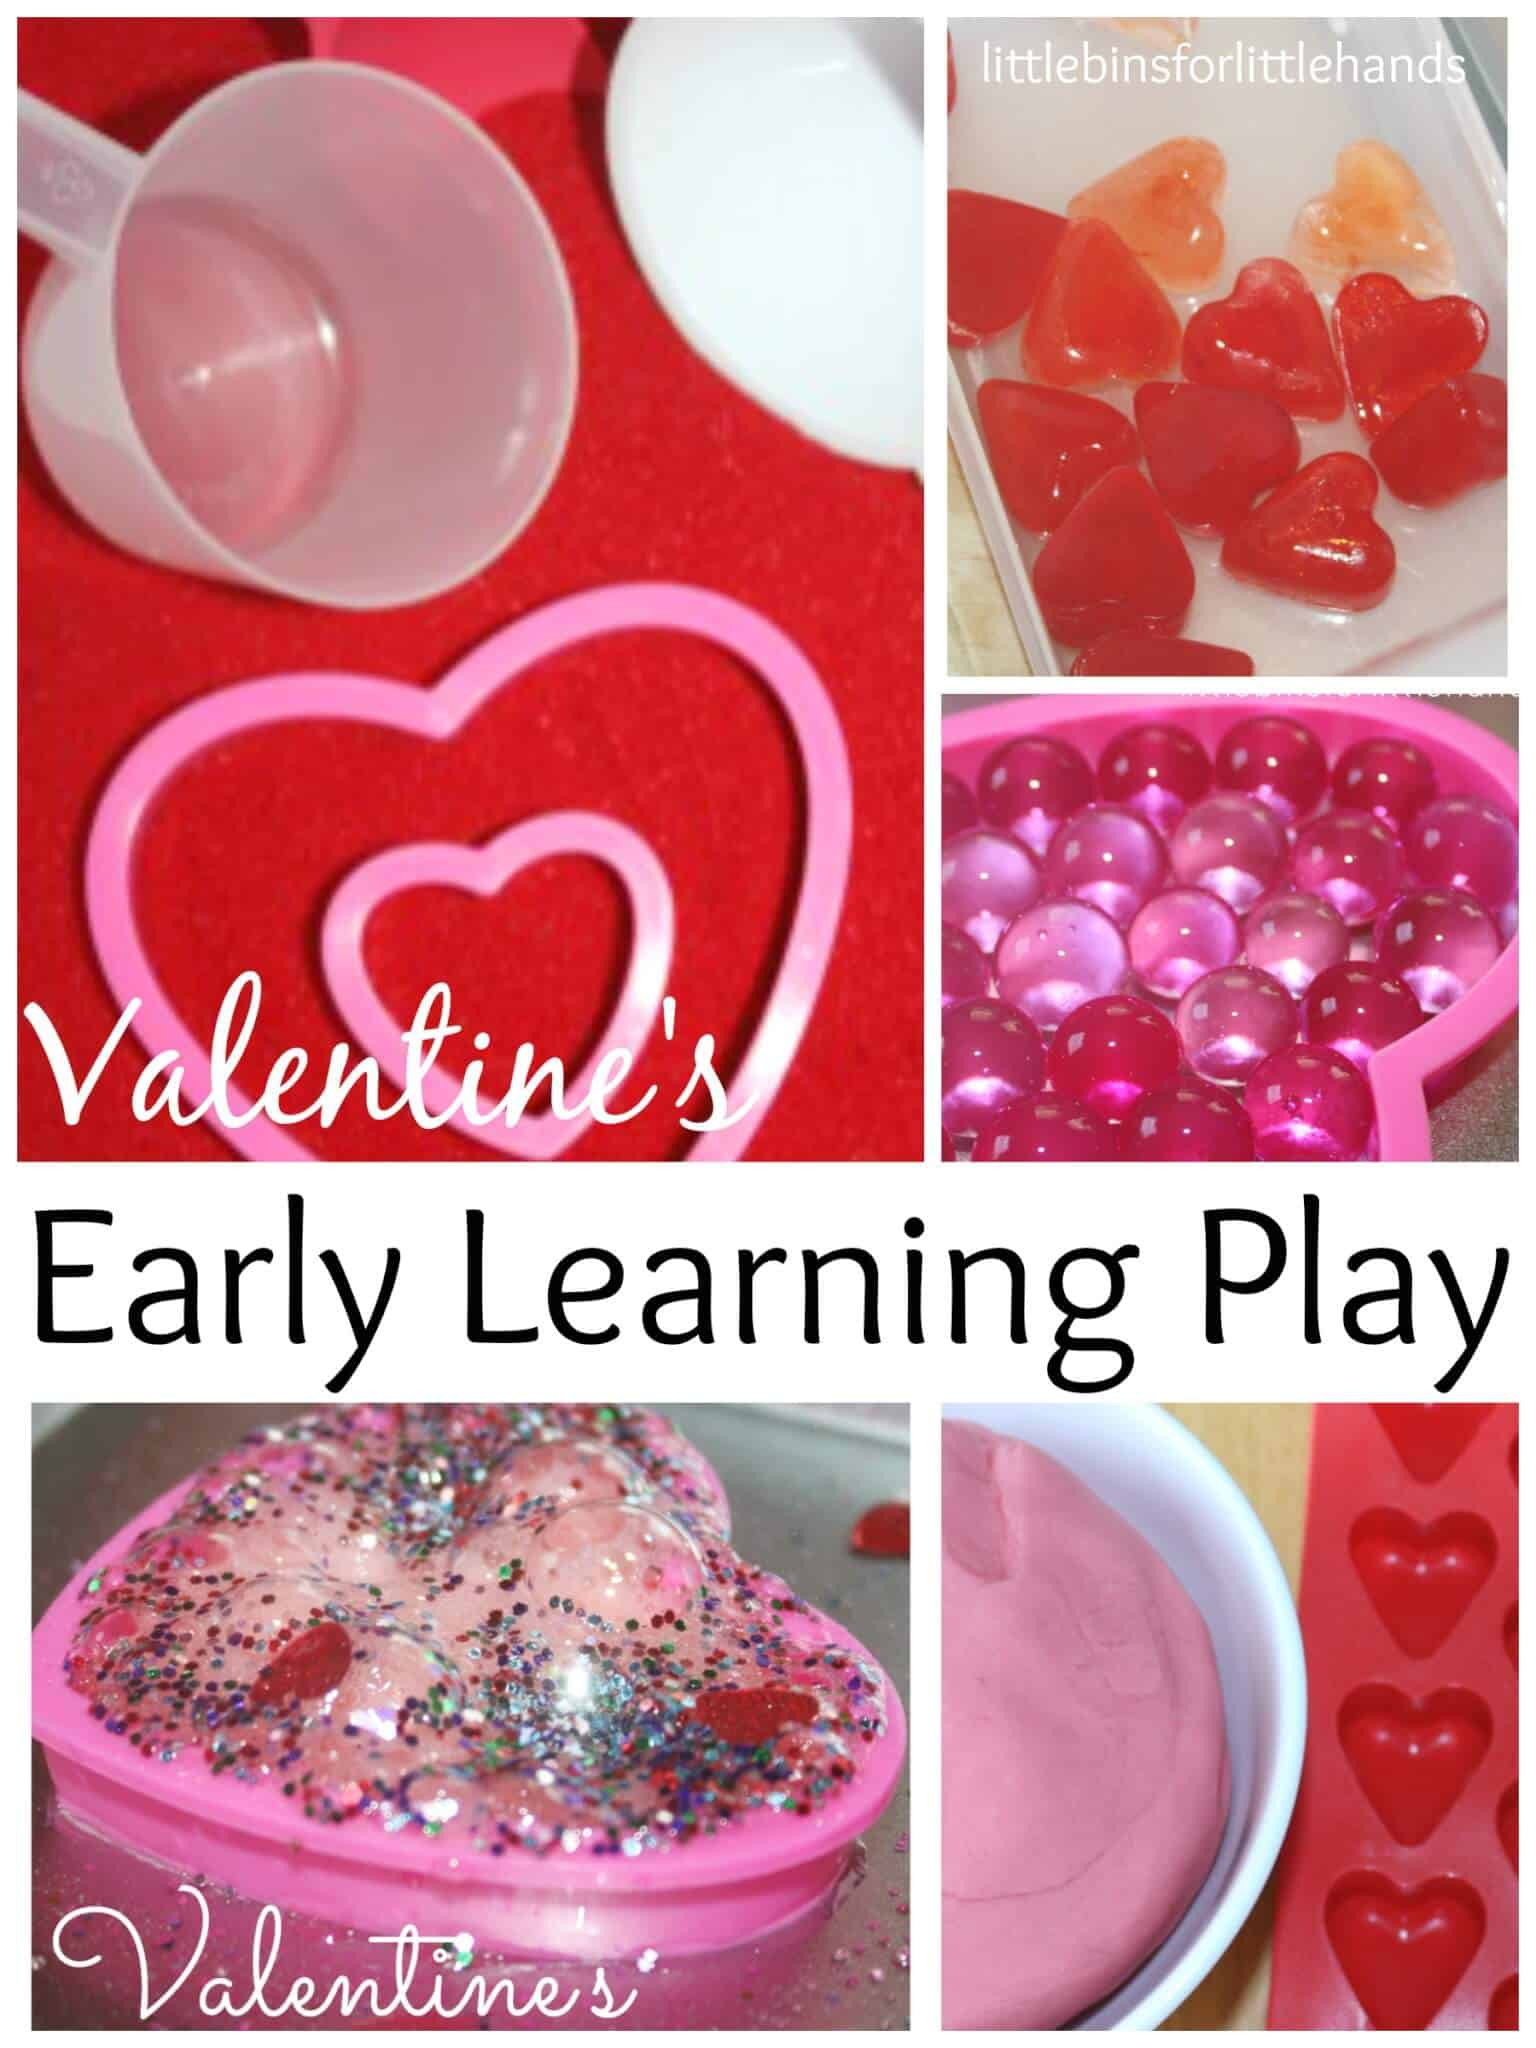 Valentines Day Ideas For Preschoolers
 Valentines Preschool Activities for Early Learning